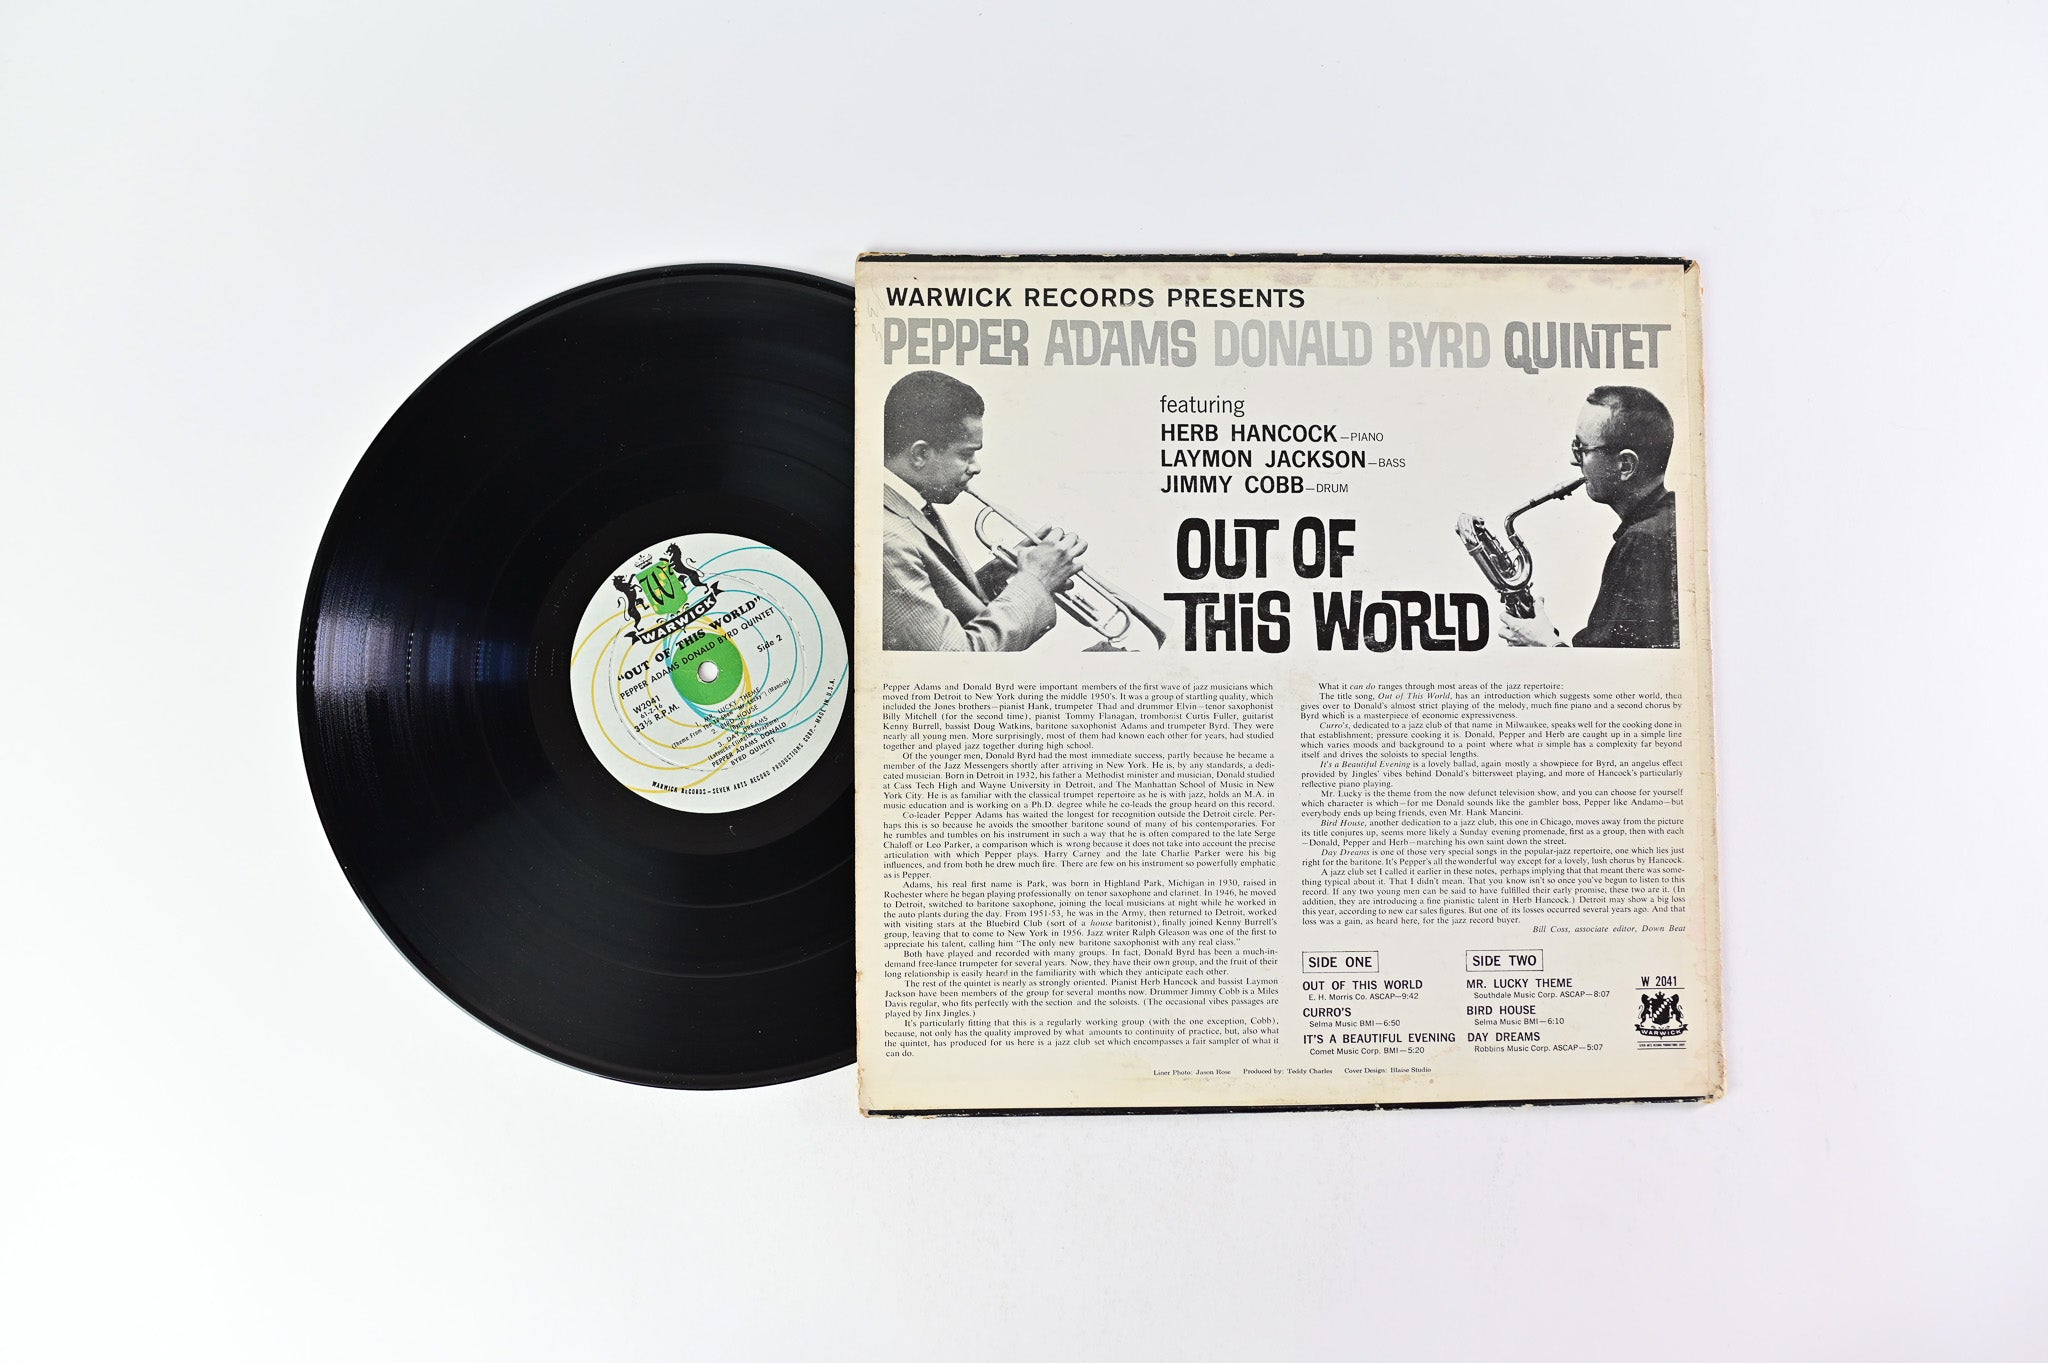 Pepper Adams Donald Byrd Quintet - Out Of This World on Warwick Mono Deep Groove